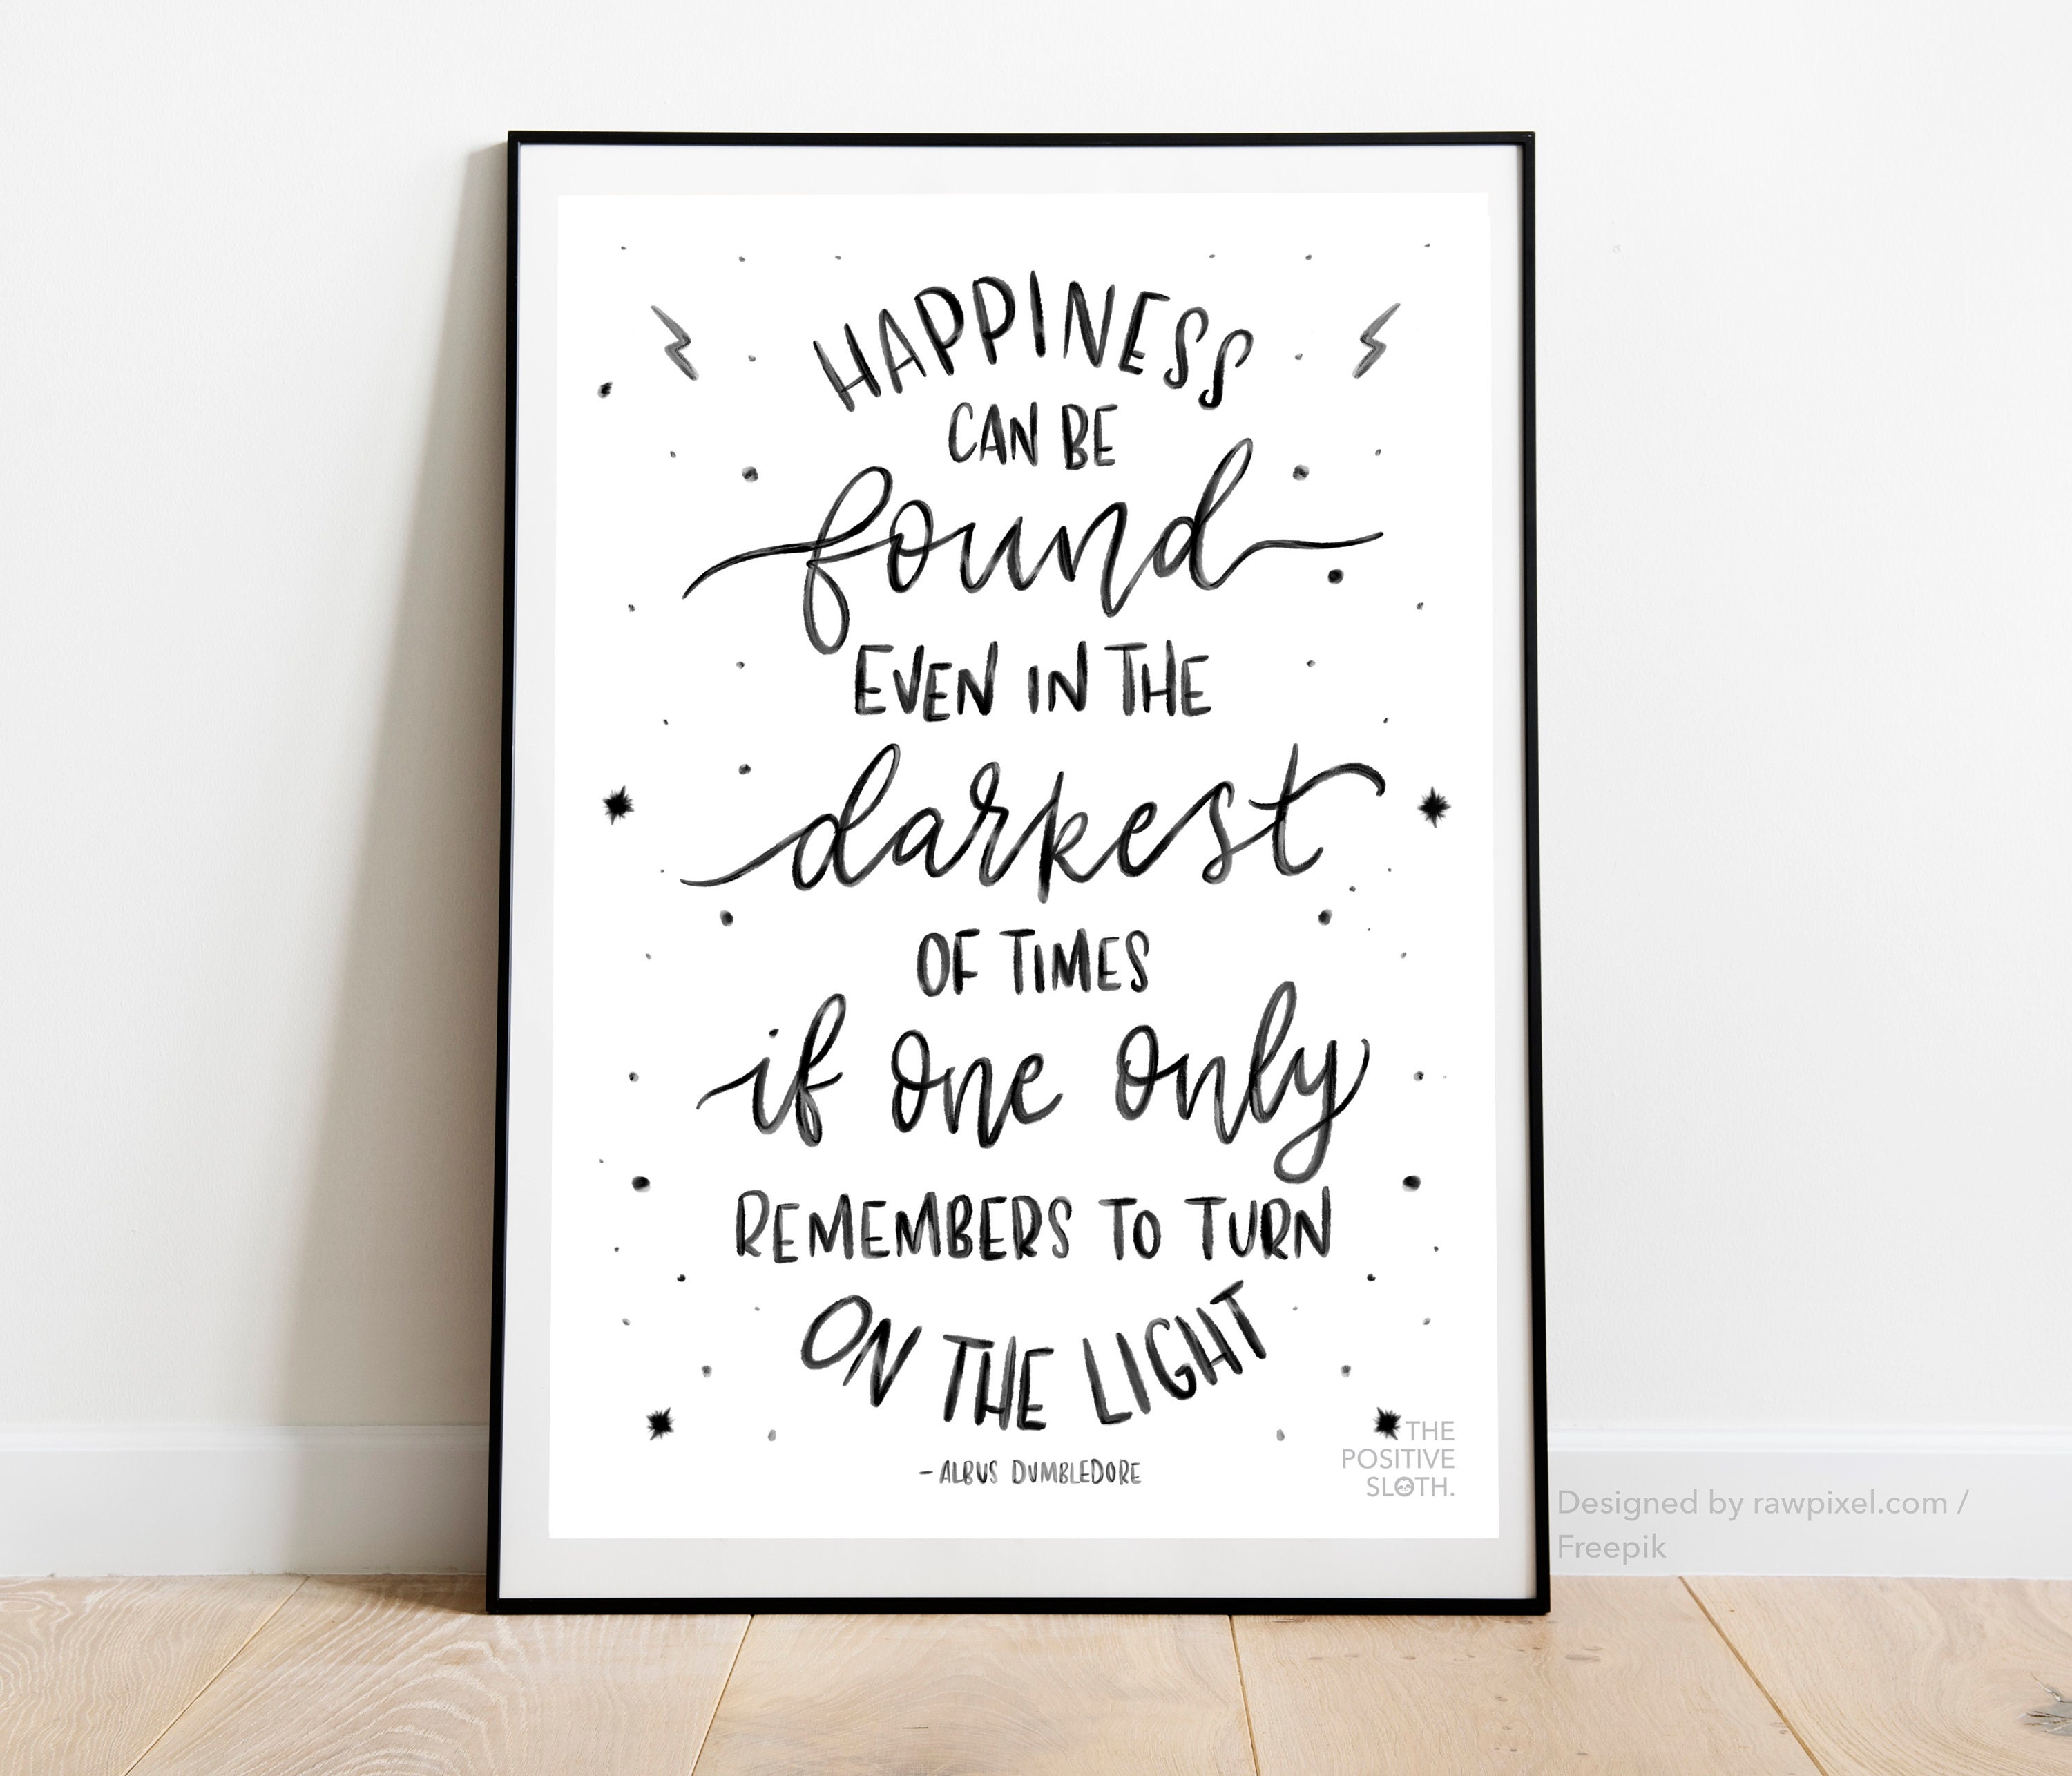 Magic Quote Harry Potter Happiness Can Be Found Even Hogwarts Wall